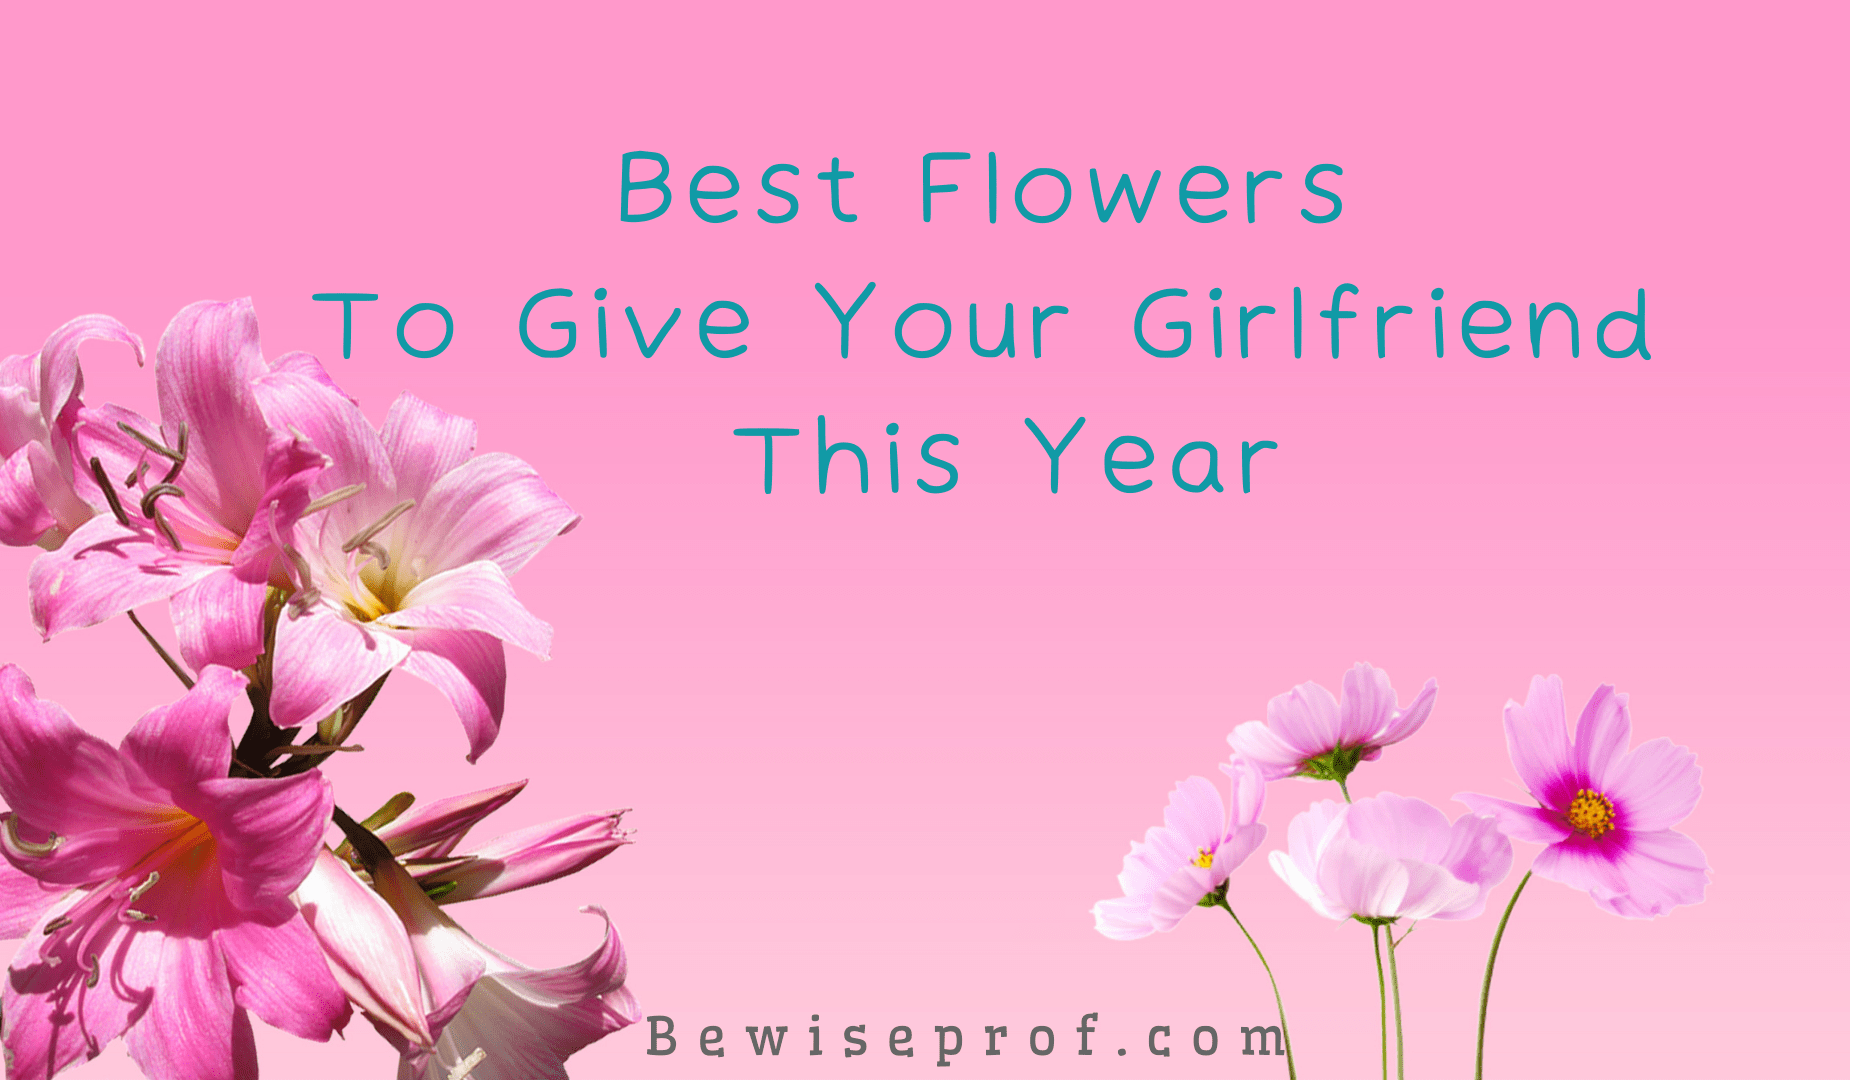 Best Flowers To Give Your Girlfriend This Year